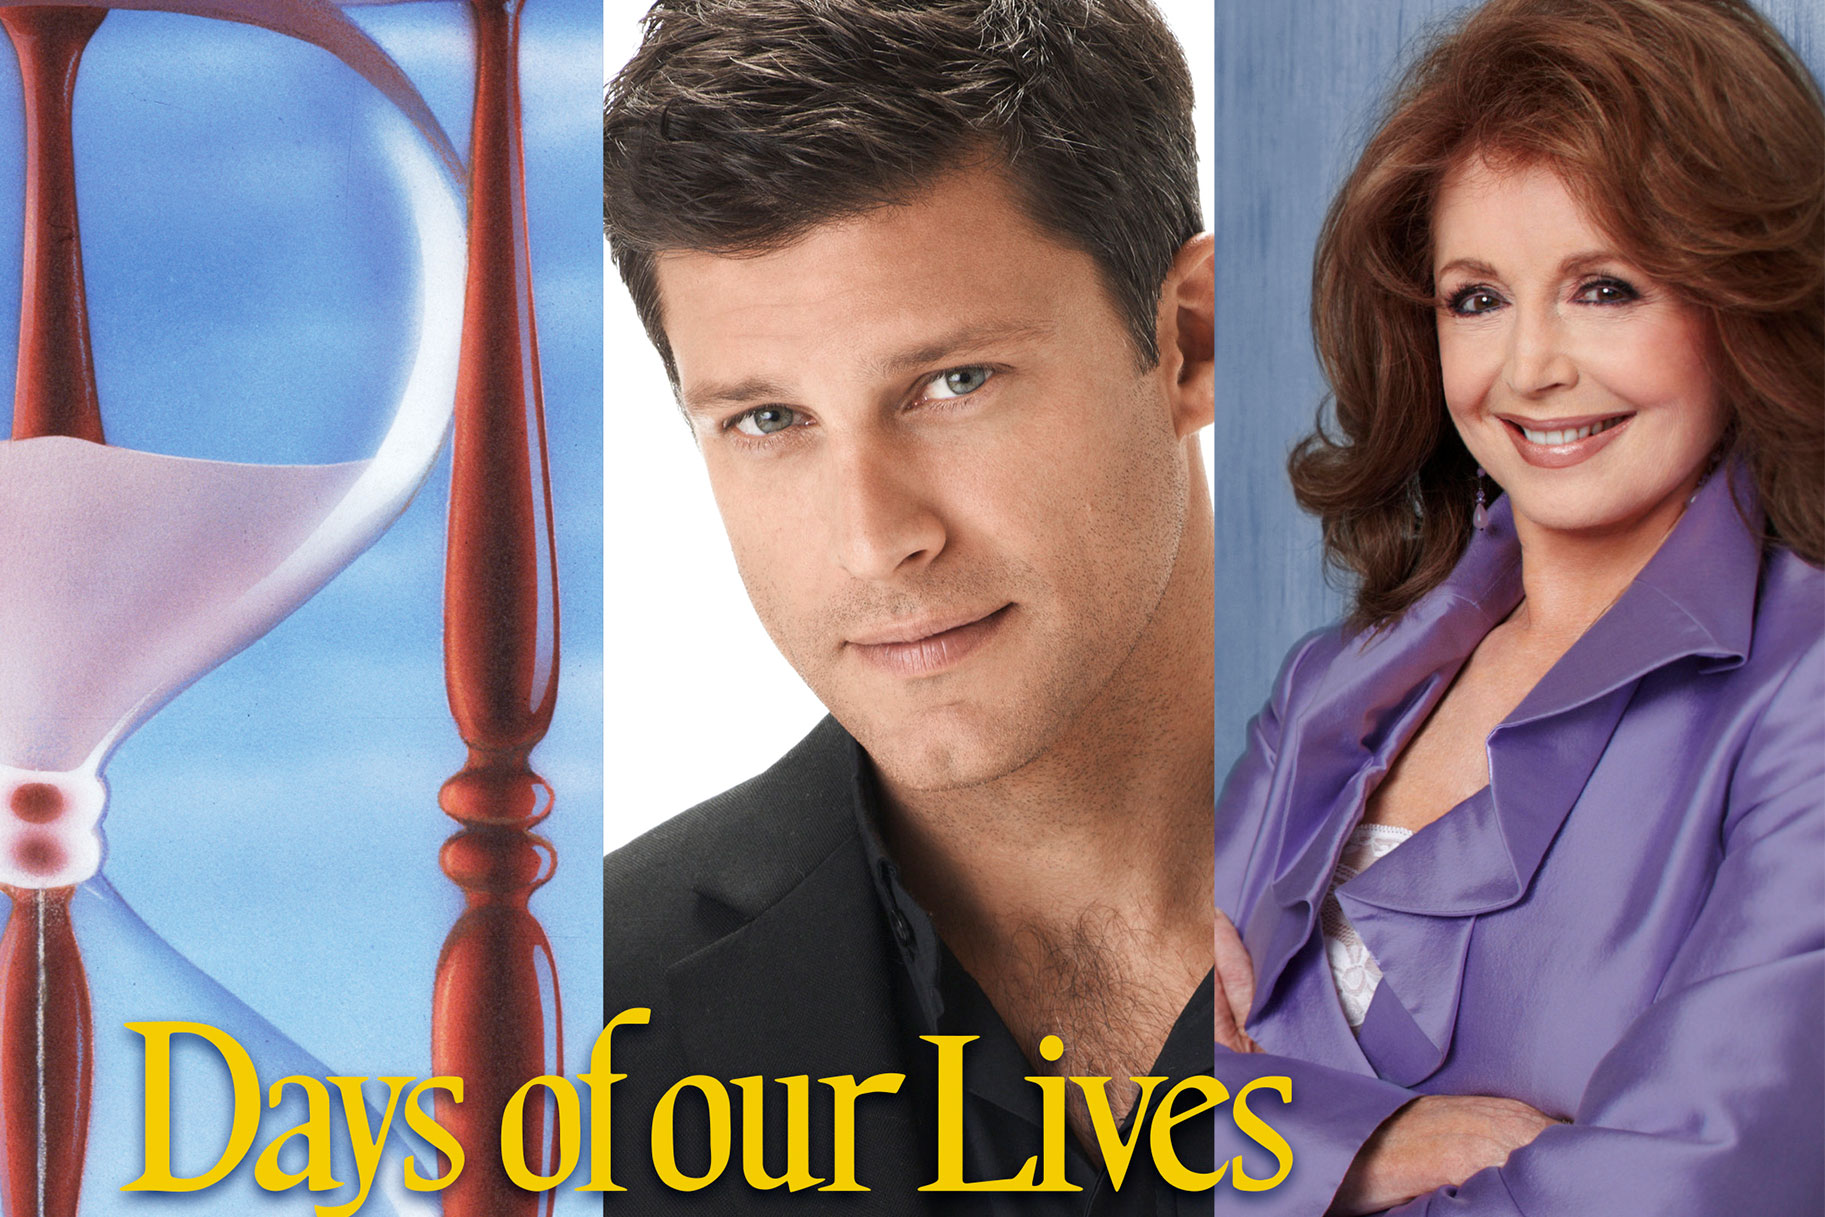 Days of Our Lives' to Launch New Digital Series 'Last Blast Reunion'